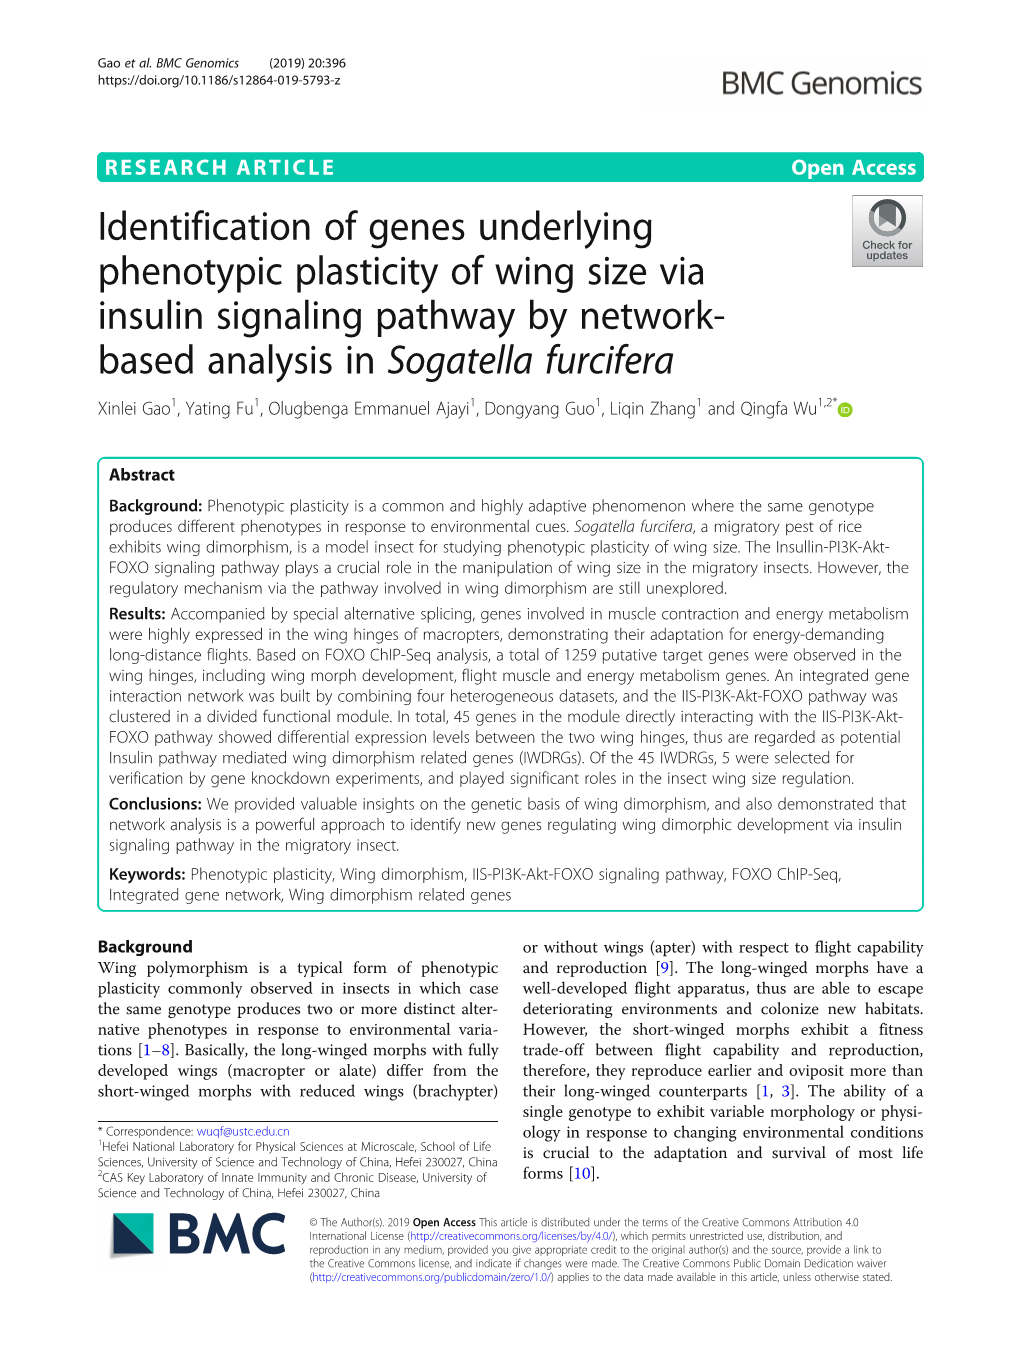 Identification of Genes Underlying Phenotypic Plasticity of Wing Size Via Insulin Signaling Pathway by Network-Based Analysis In